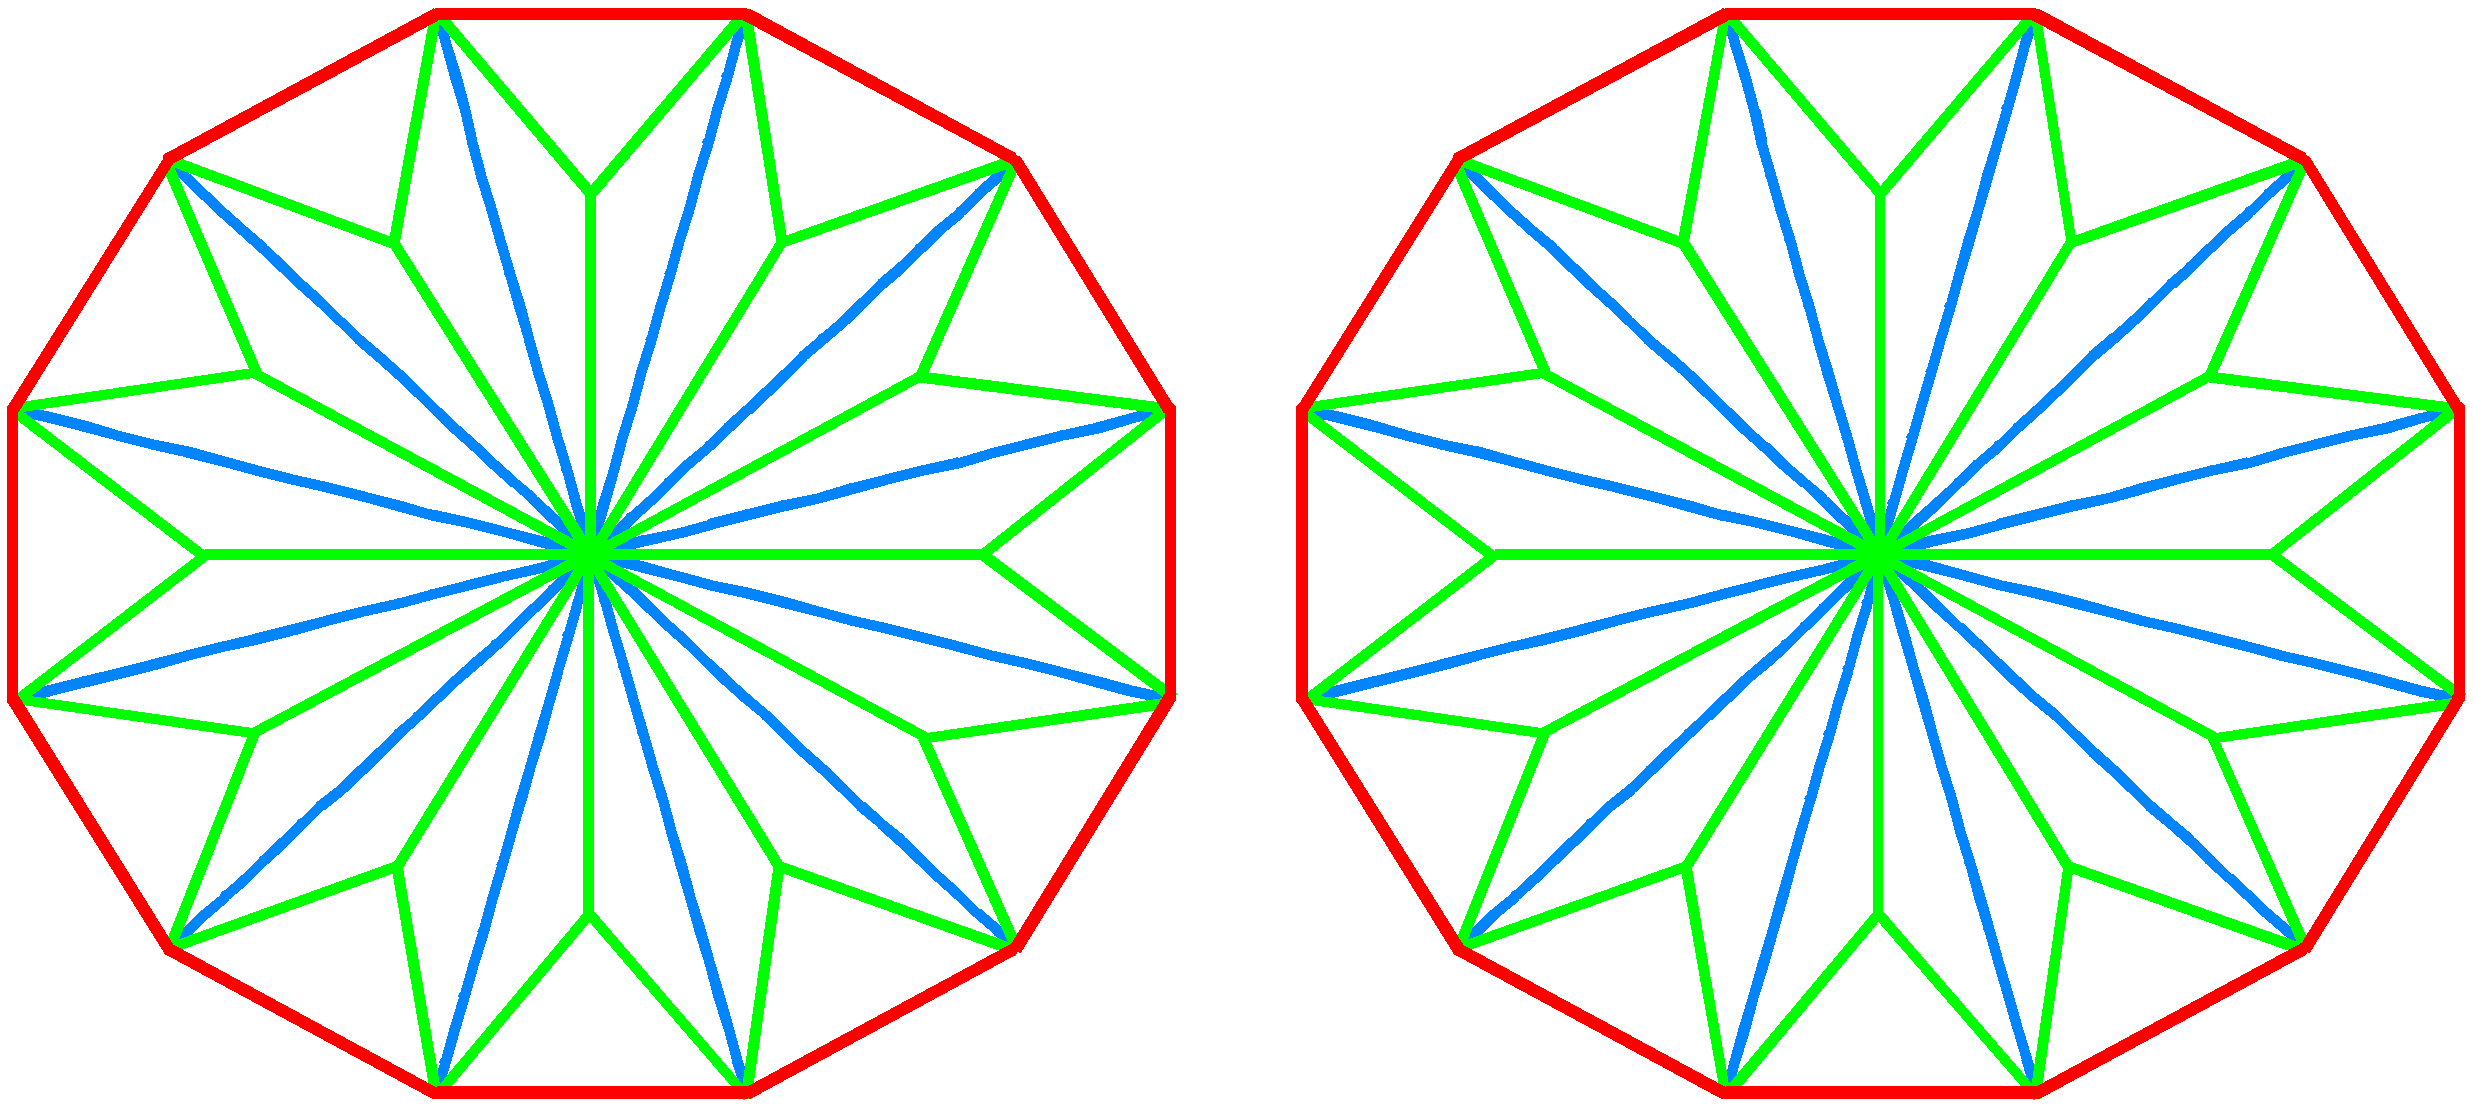 240 geometrical elements in two Type A dodecagons